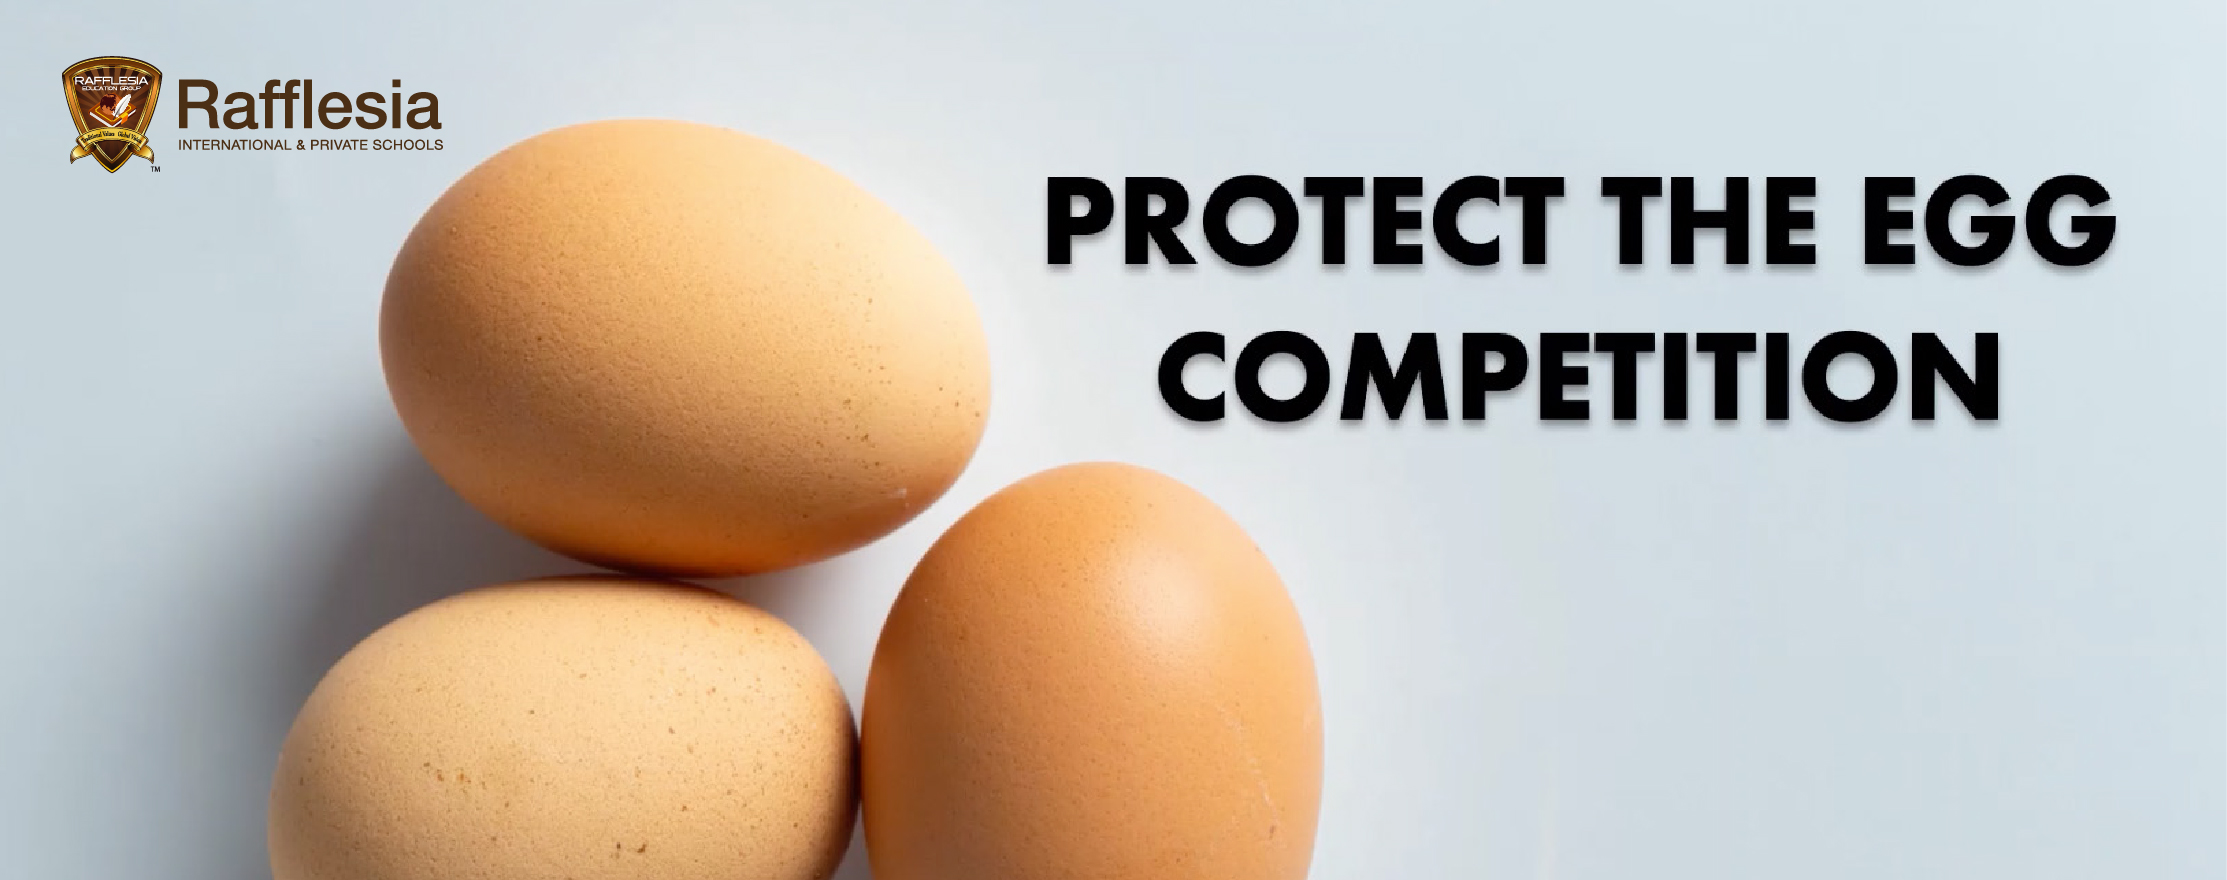 Protect the Egg Competition